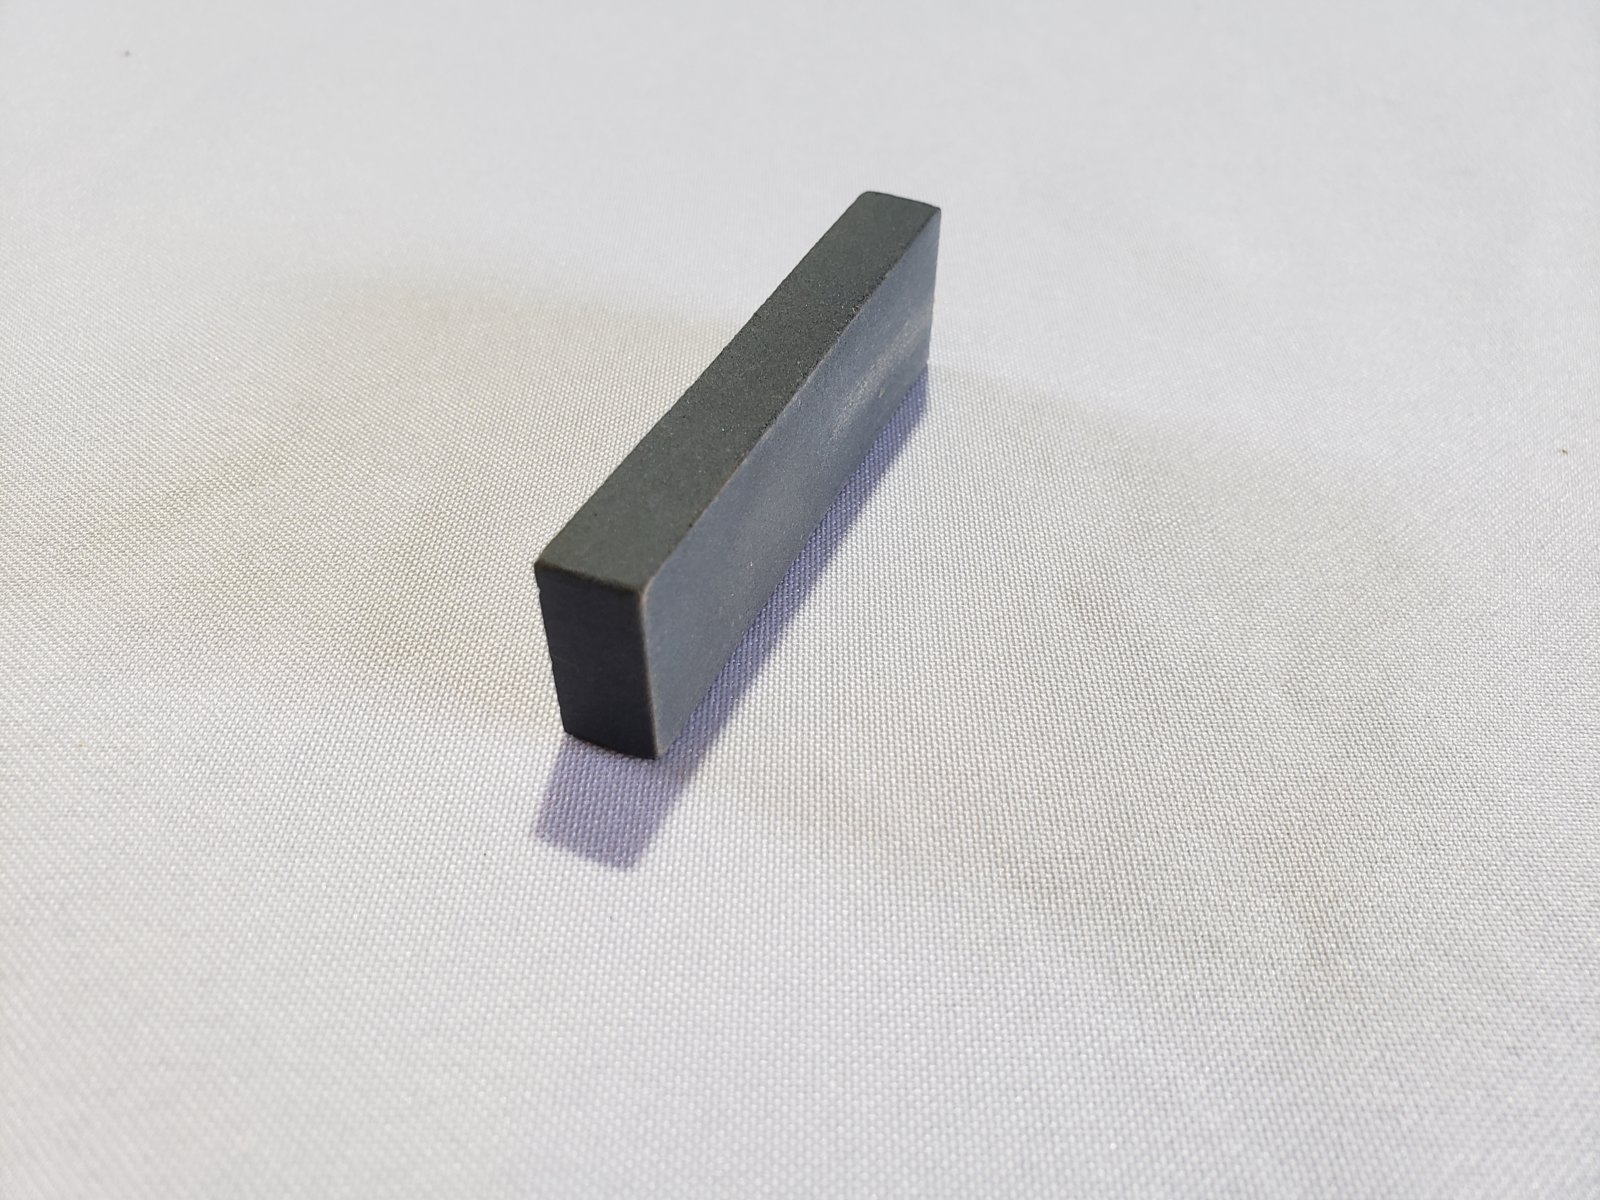 Sharpening Stone, Side View